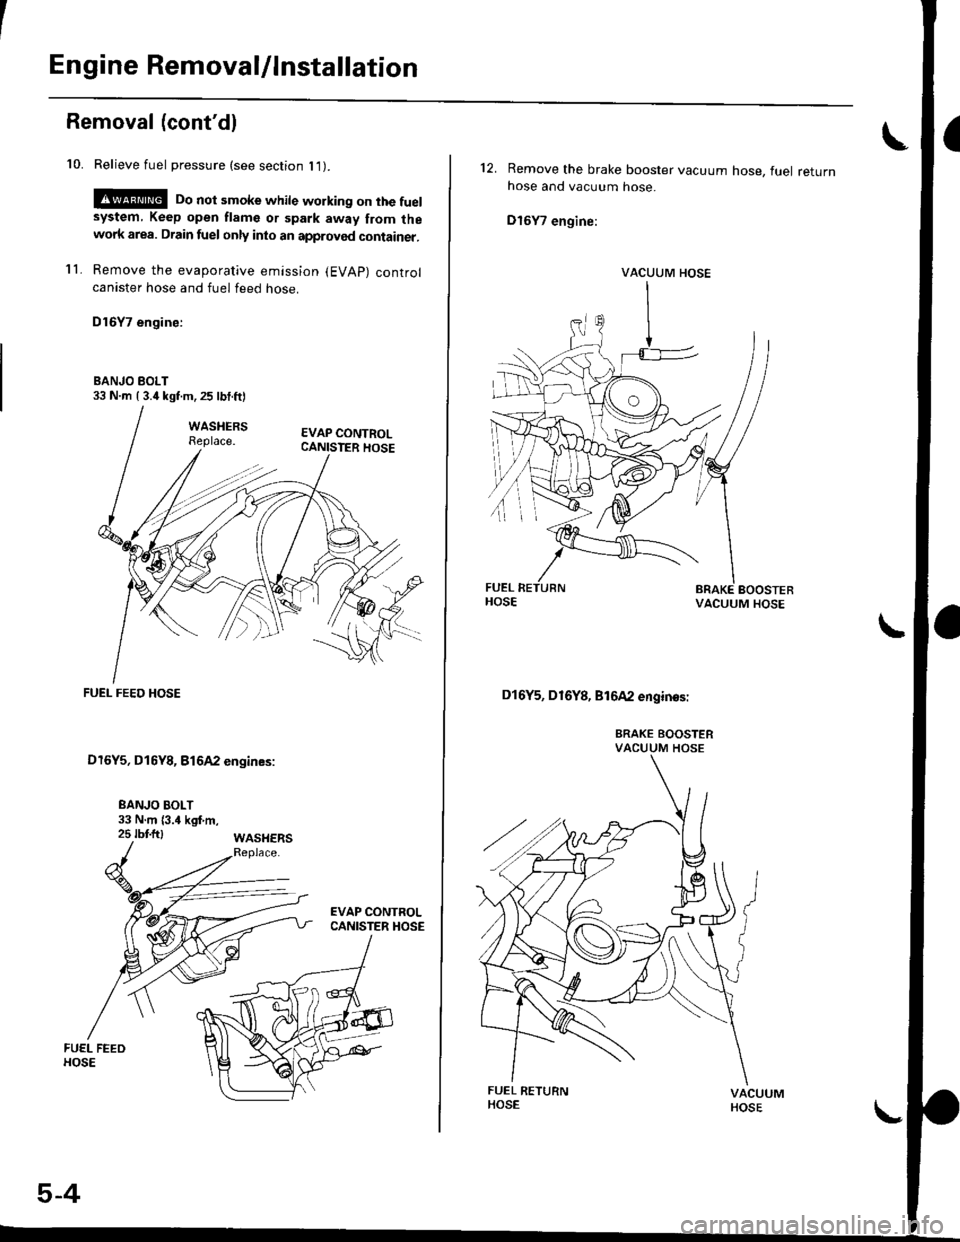 HONDA CIVIC 1998 6.G Workshop Manual Engine Removal/lnstallation
Removal (contdl
10. Relieve fuel pressure (see section l1).
!@ Do not smoke while working on the fuelsystem, Keep open flame or spark away from thewolk area. Drain fuel on